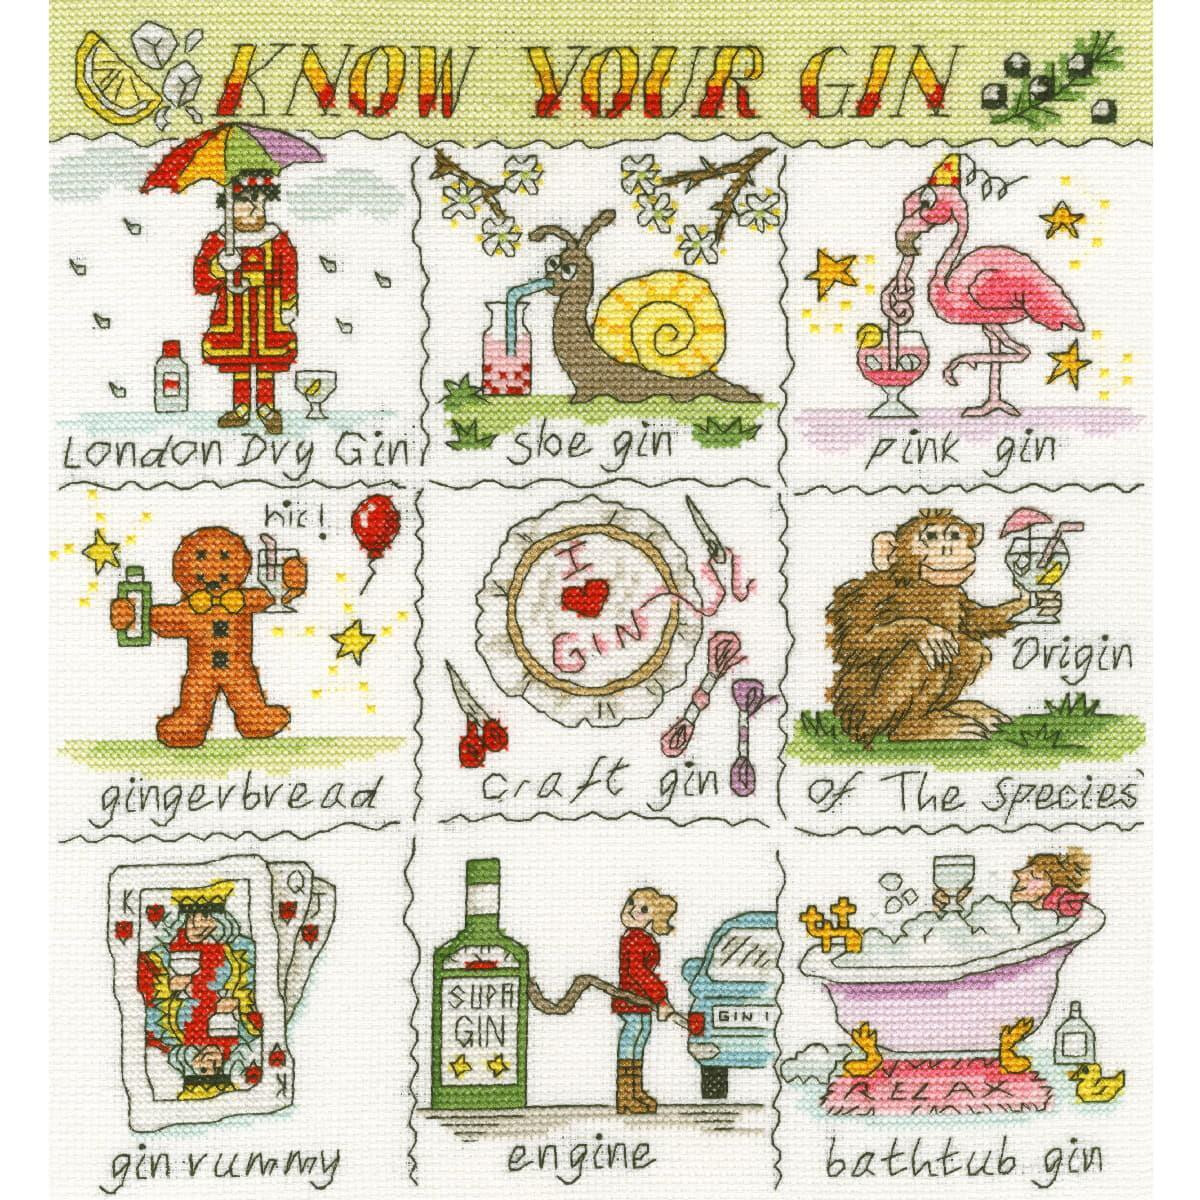 An elaborately embroidered table entitled Know Your Gin...